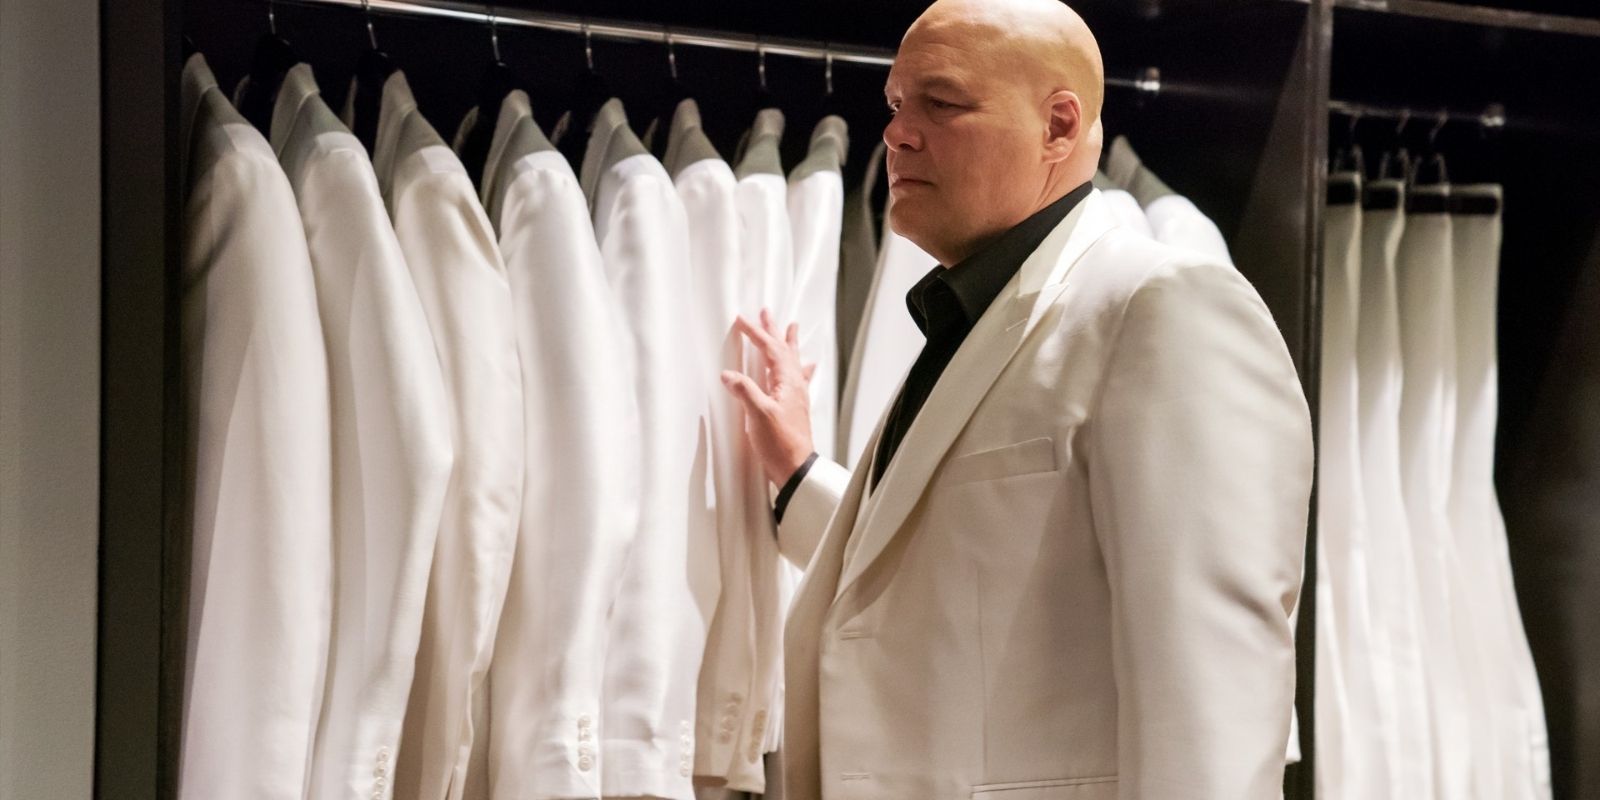 Vincent D'Onofrio as Kingpin stands in front of a wardrobe filled with white suits